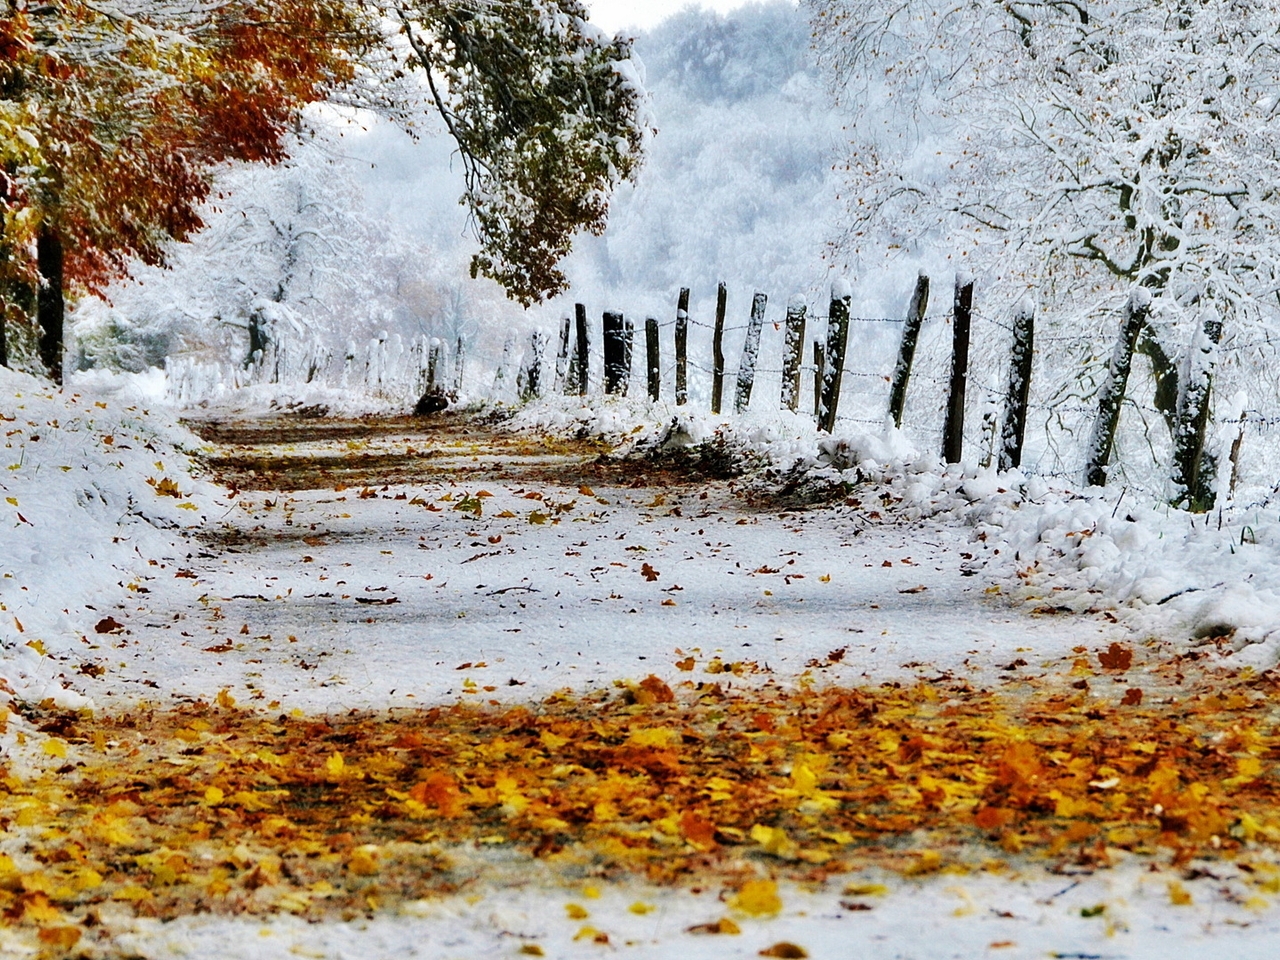 Image: Snow, yellow leaves, trees, road, fence